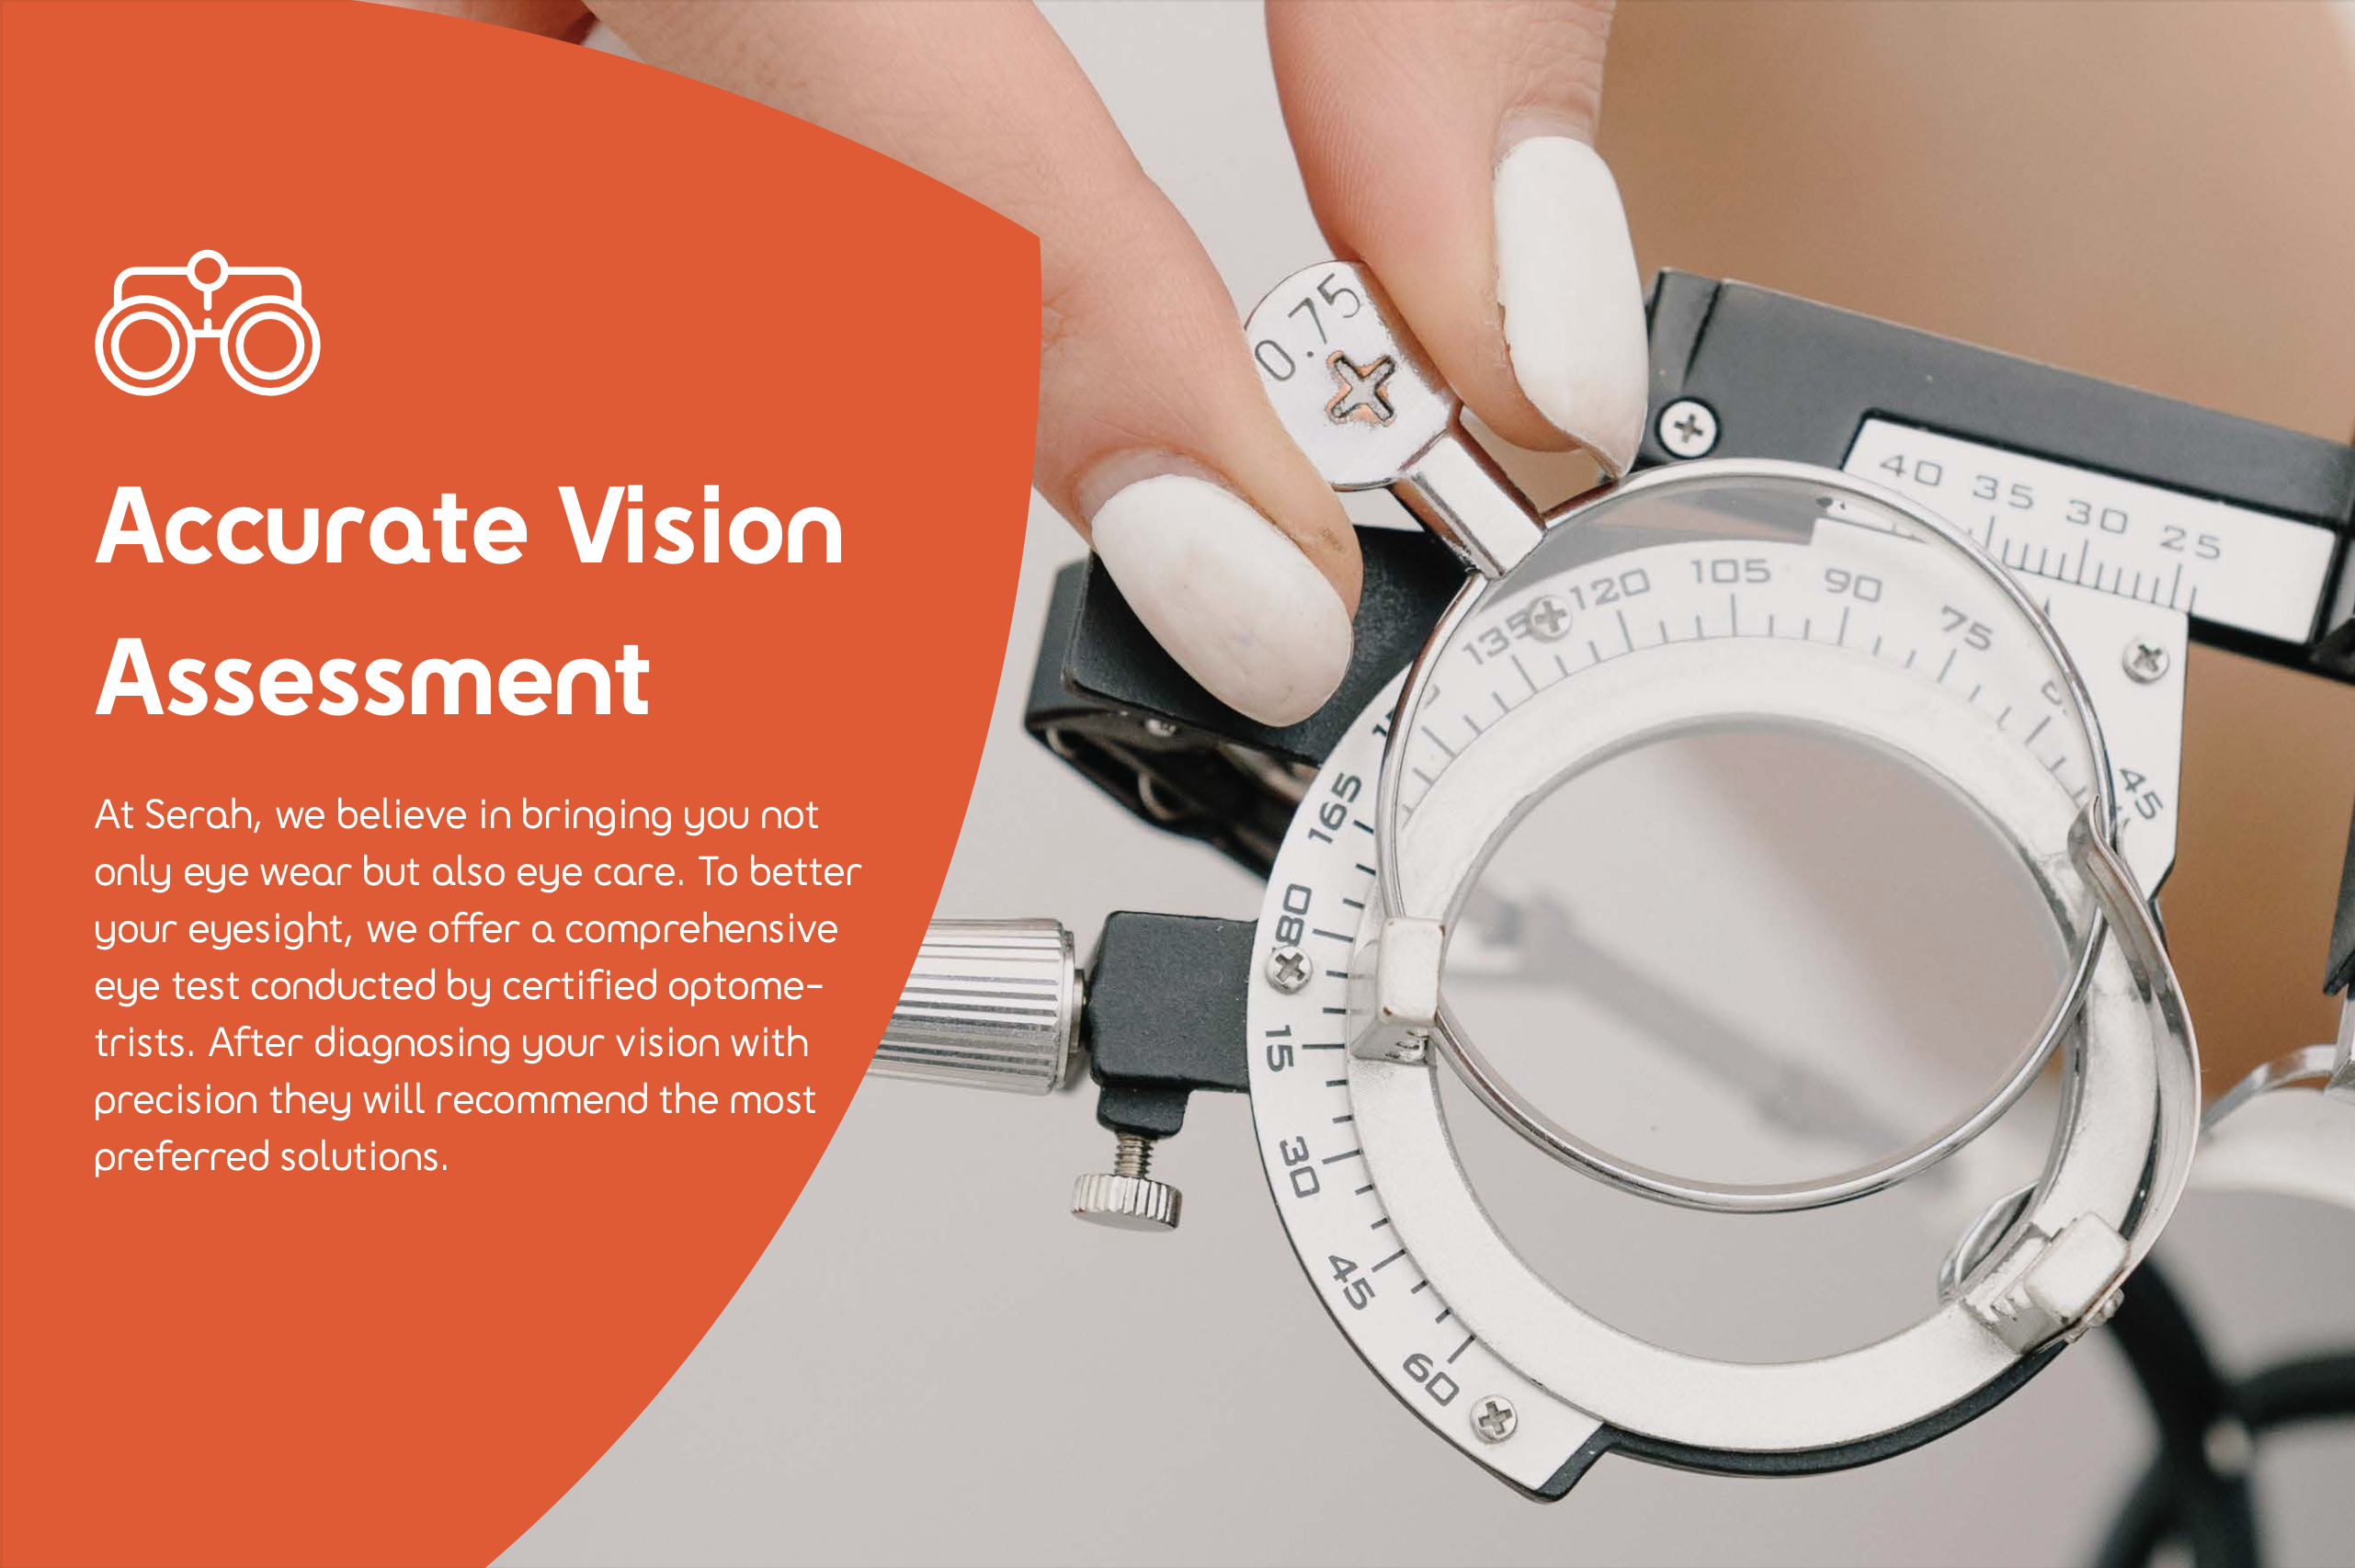 Accurate Vision Assessment